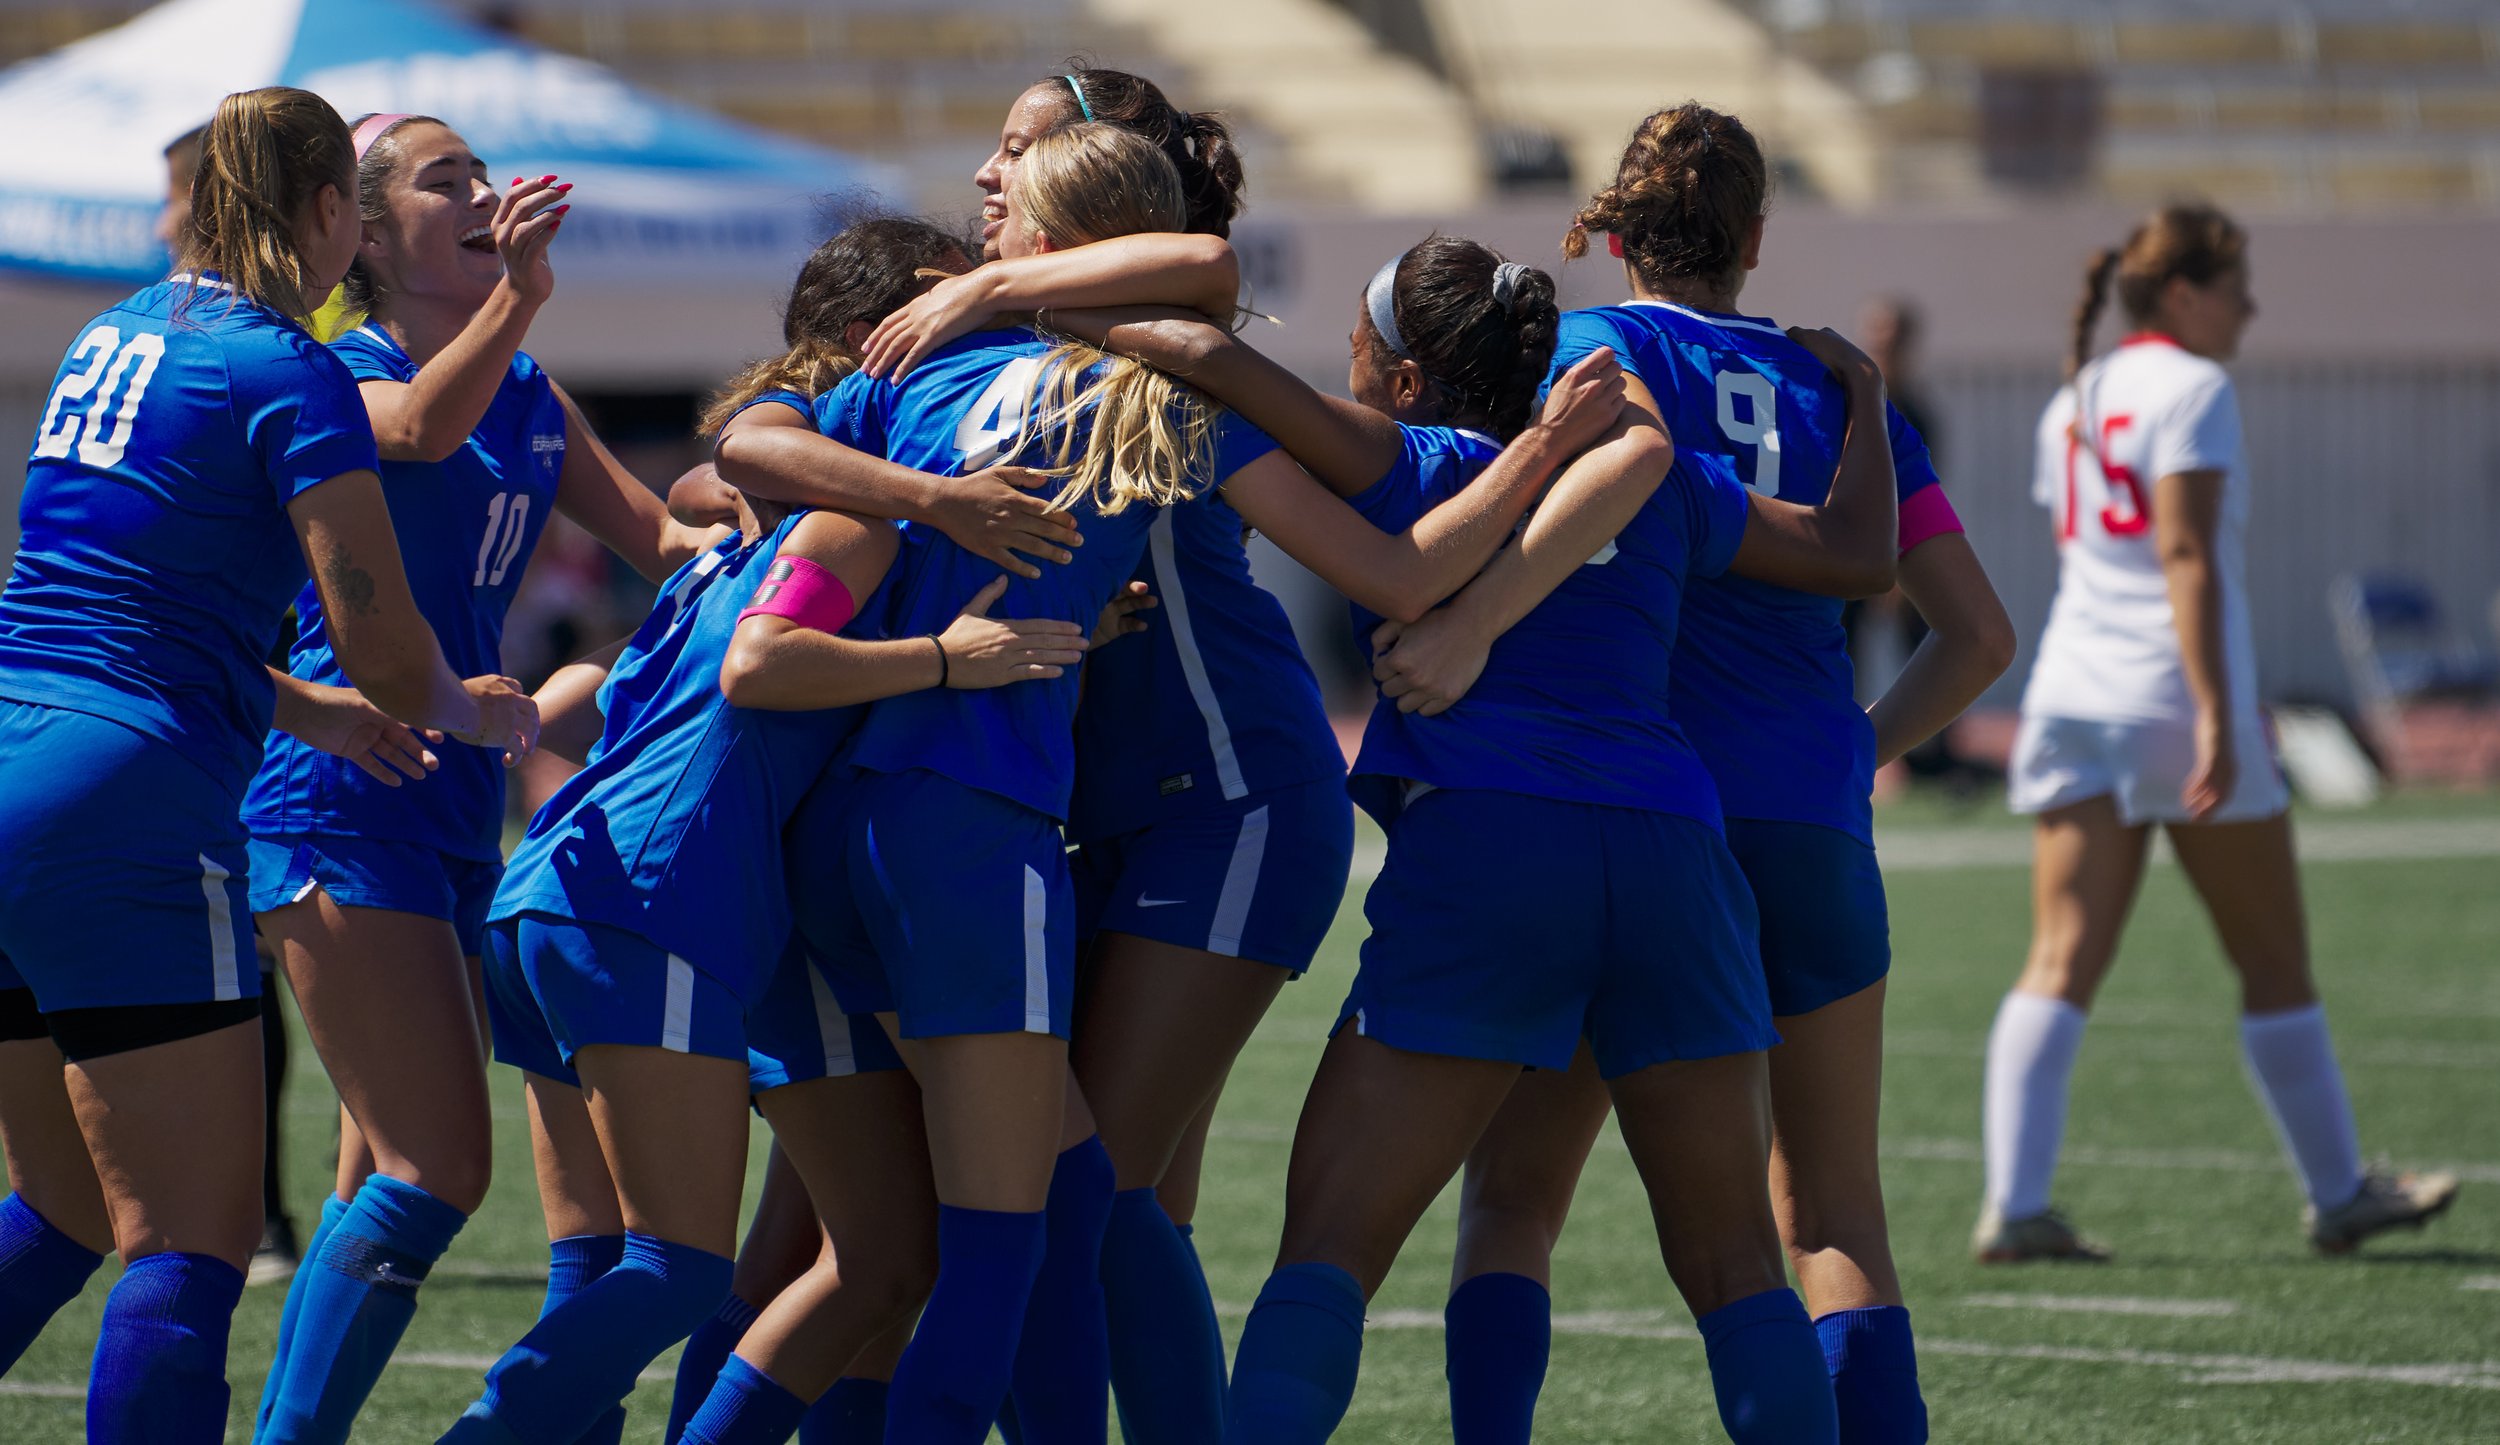  Members of the Santa Monica College Corsairs Women's Soccer Team celebrate Emma Rierstam's (4, center) goal early in the game against the Santa Barbara City College Vaqueros on Tuesday, Sept. 20, 2022, at Corsair Field in Santa Monica, Calif. (Nicho